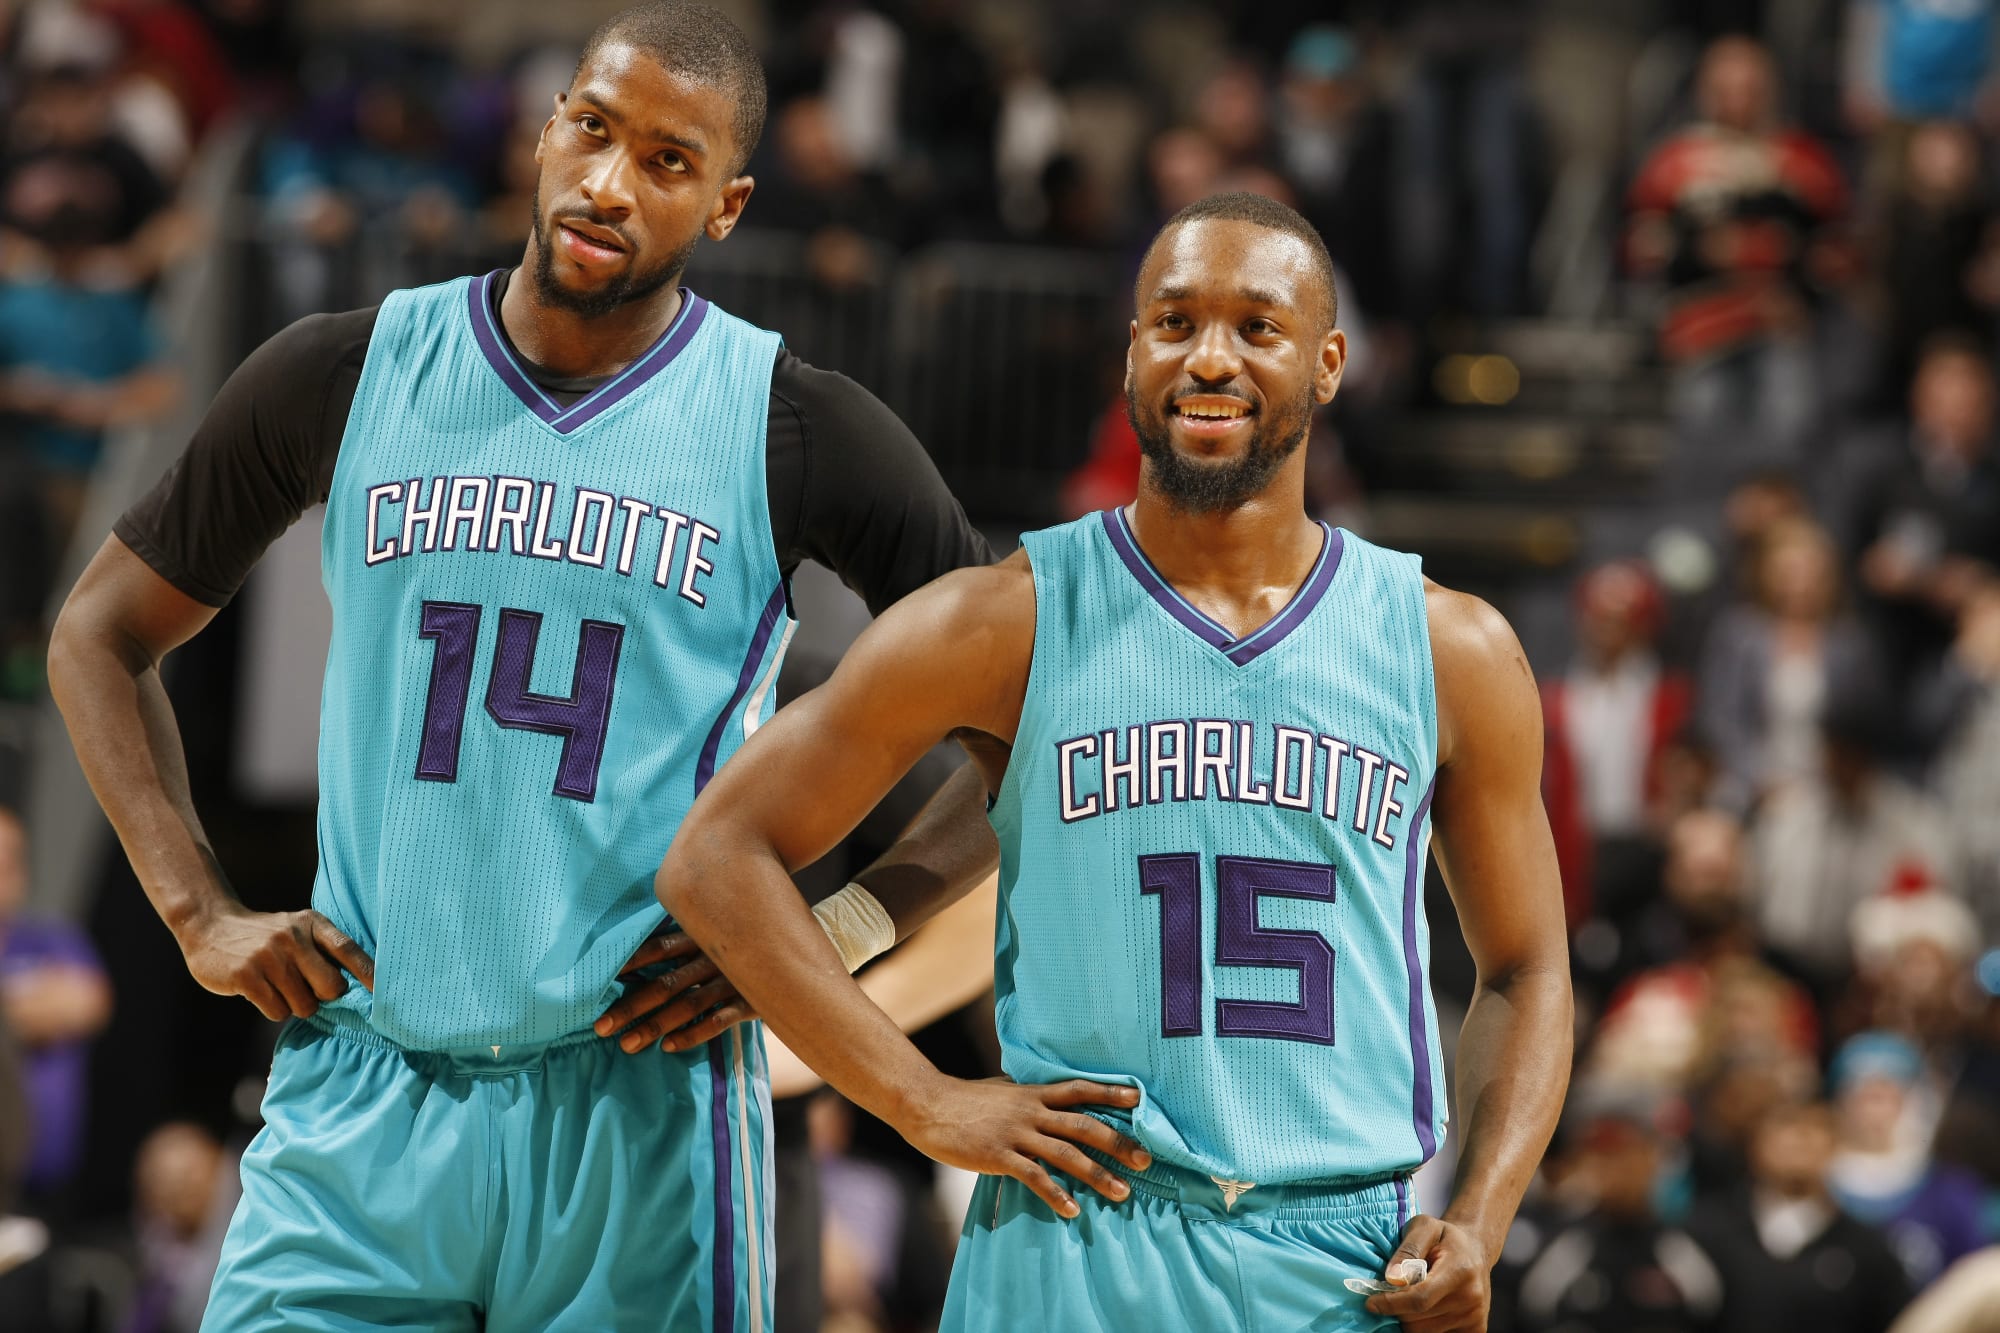 Charlotte Hornets' potential lineup changes, Retired numbers